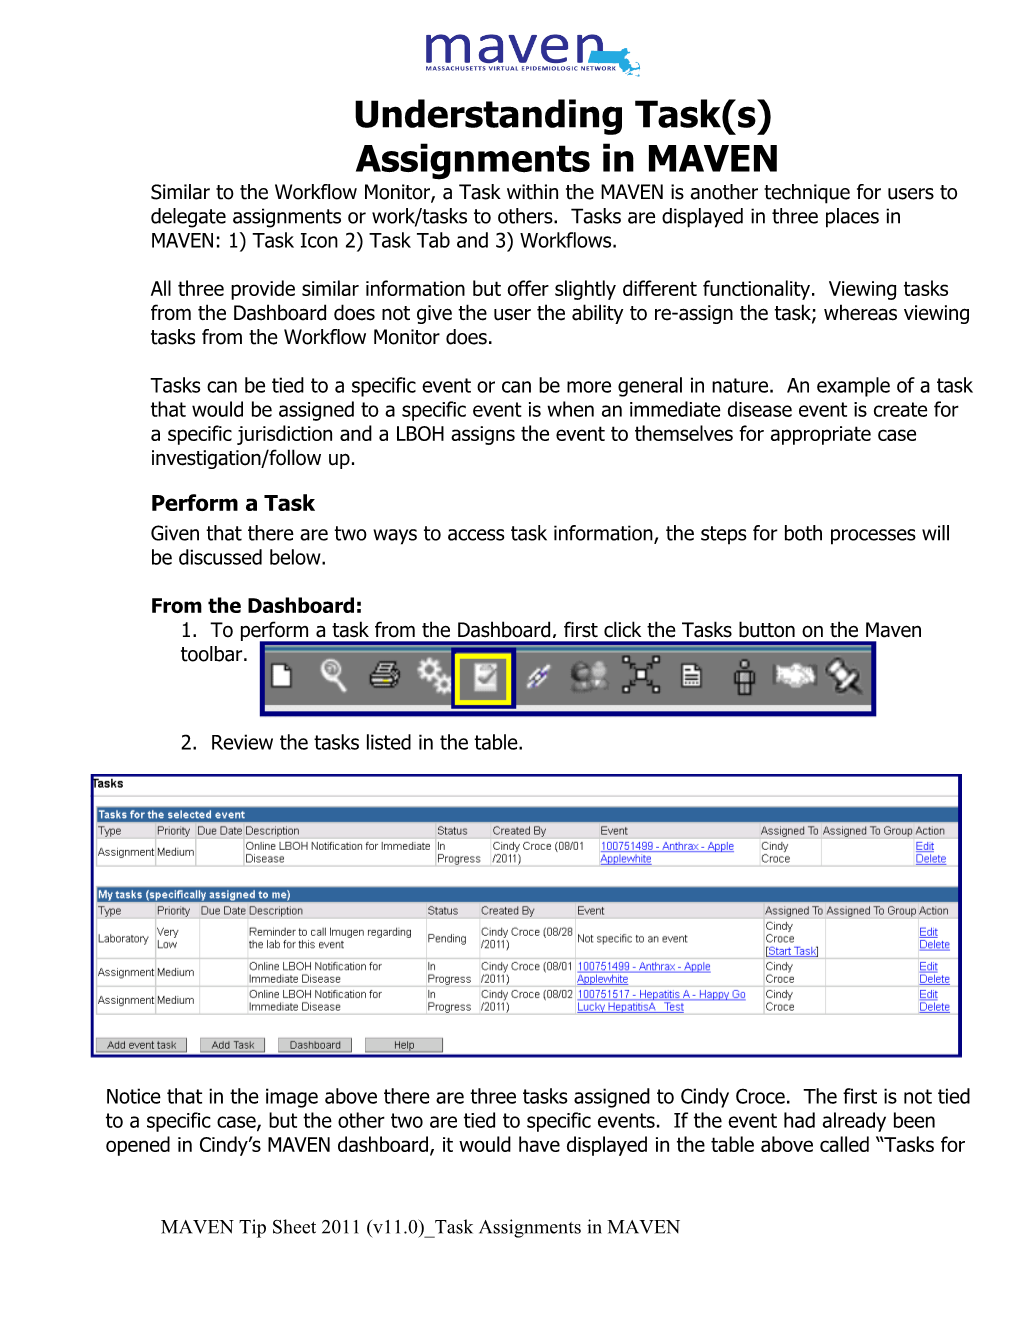 Assignments in MAVEN